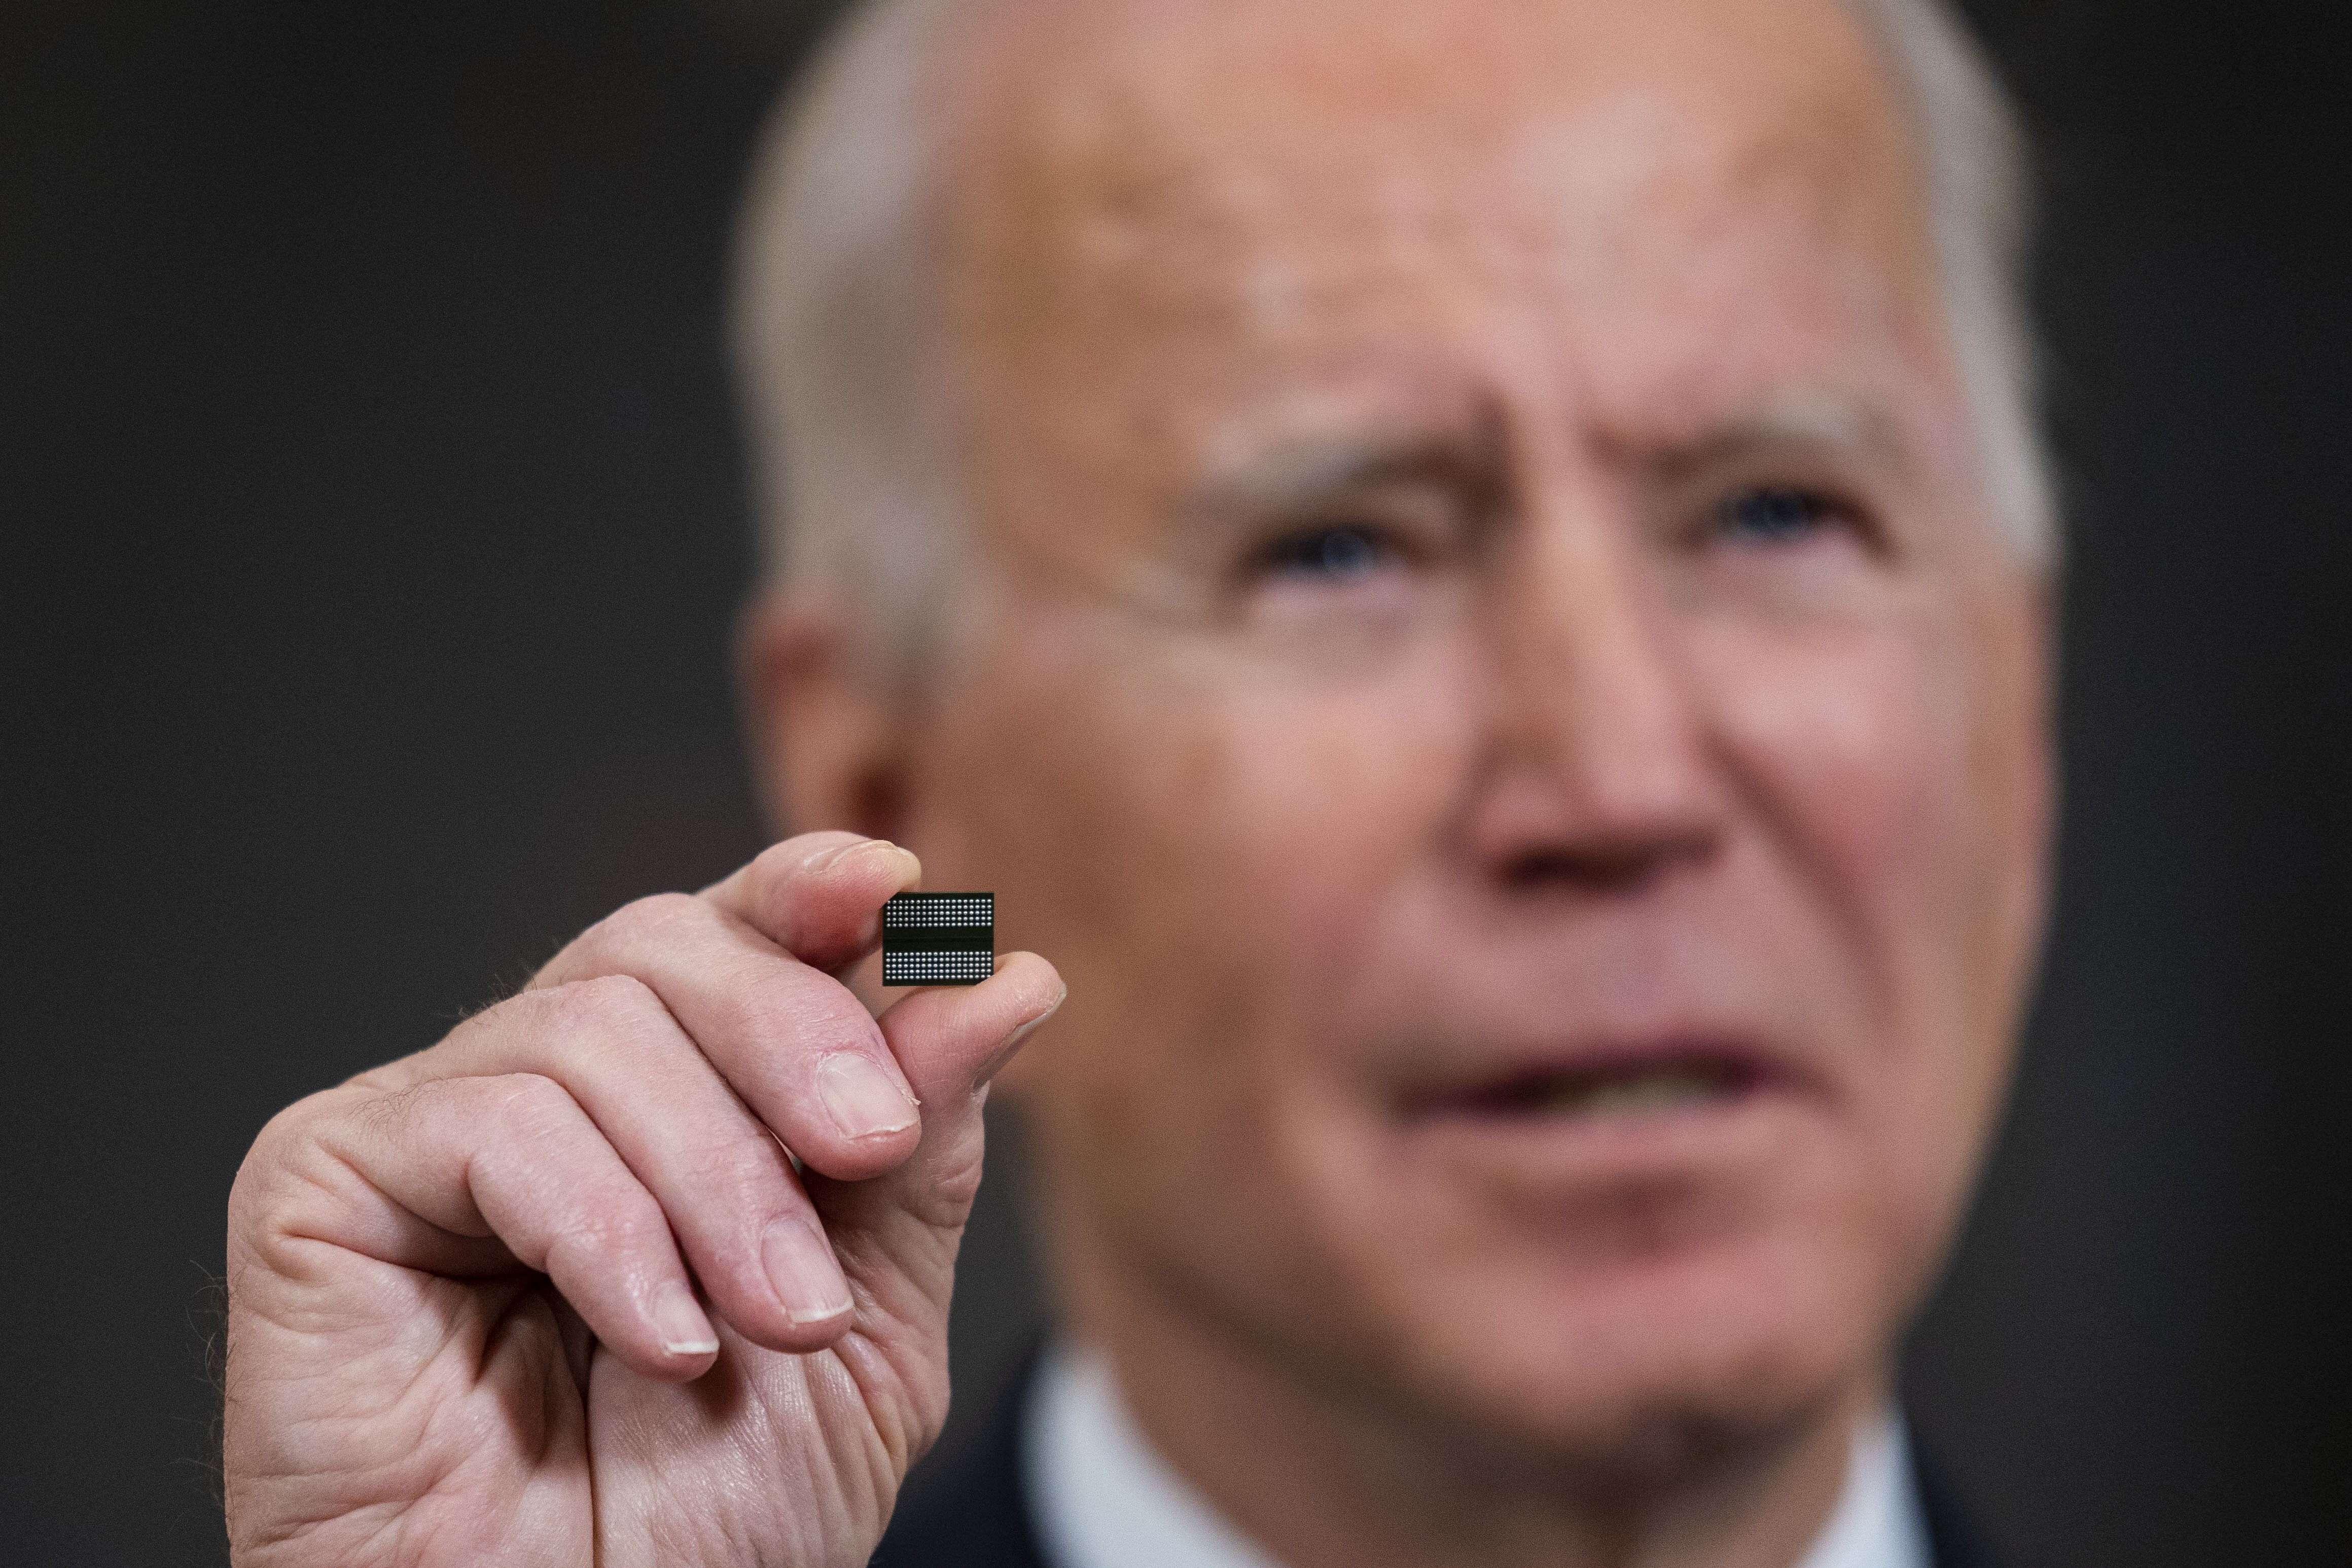 US President Joe Biden holds a semiconductor during his remarks before signing an executive order on the economy in the State Dining Room of the White House on February 24 in Washington. Photo: AFP